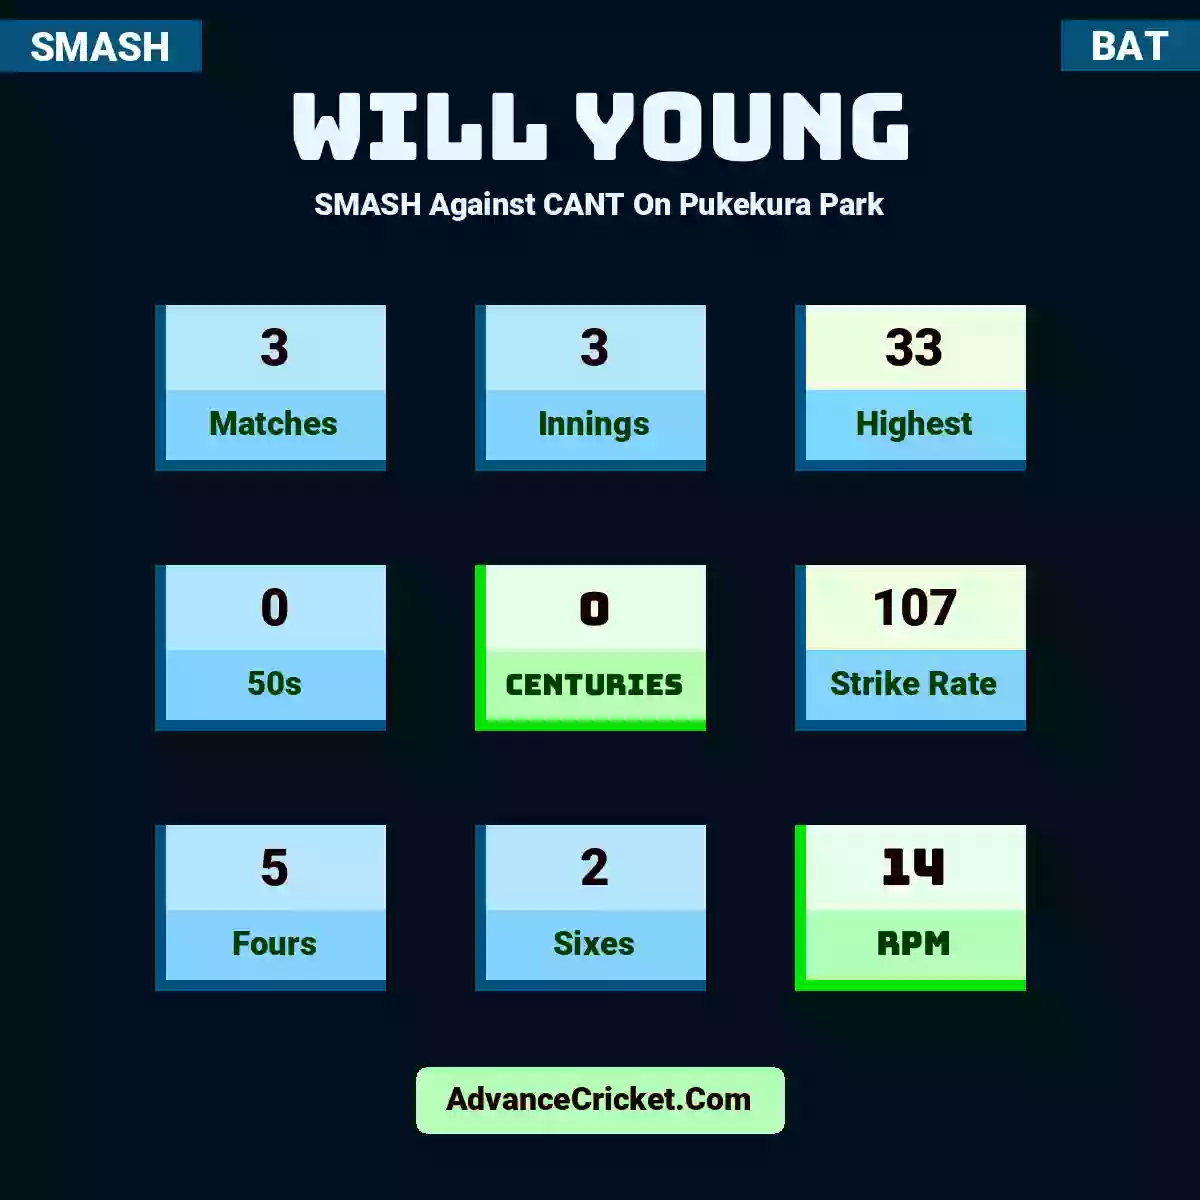 Will Young SMASH  Against CANT On Pukekura Park, Will Young played 3 matches, scored 33 runs as highest, 0 half-centuries, and 0 centuries, with a strike rate of 107. W.Young hit 5 fours and 2 sixes, with an RPM of 14.